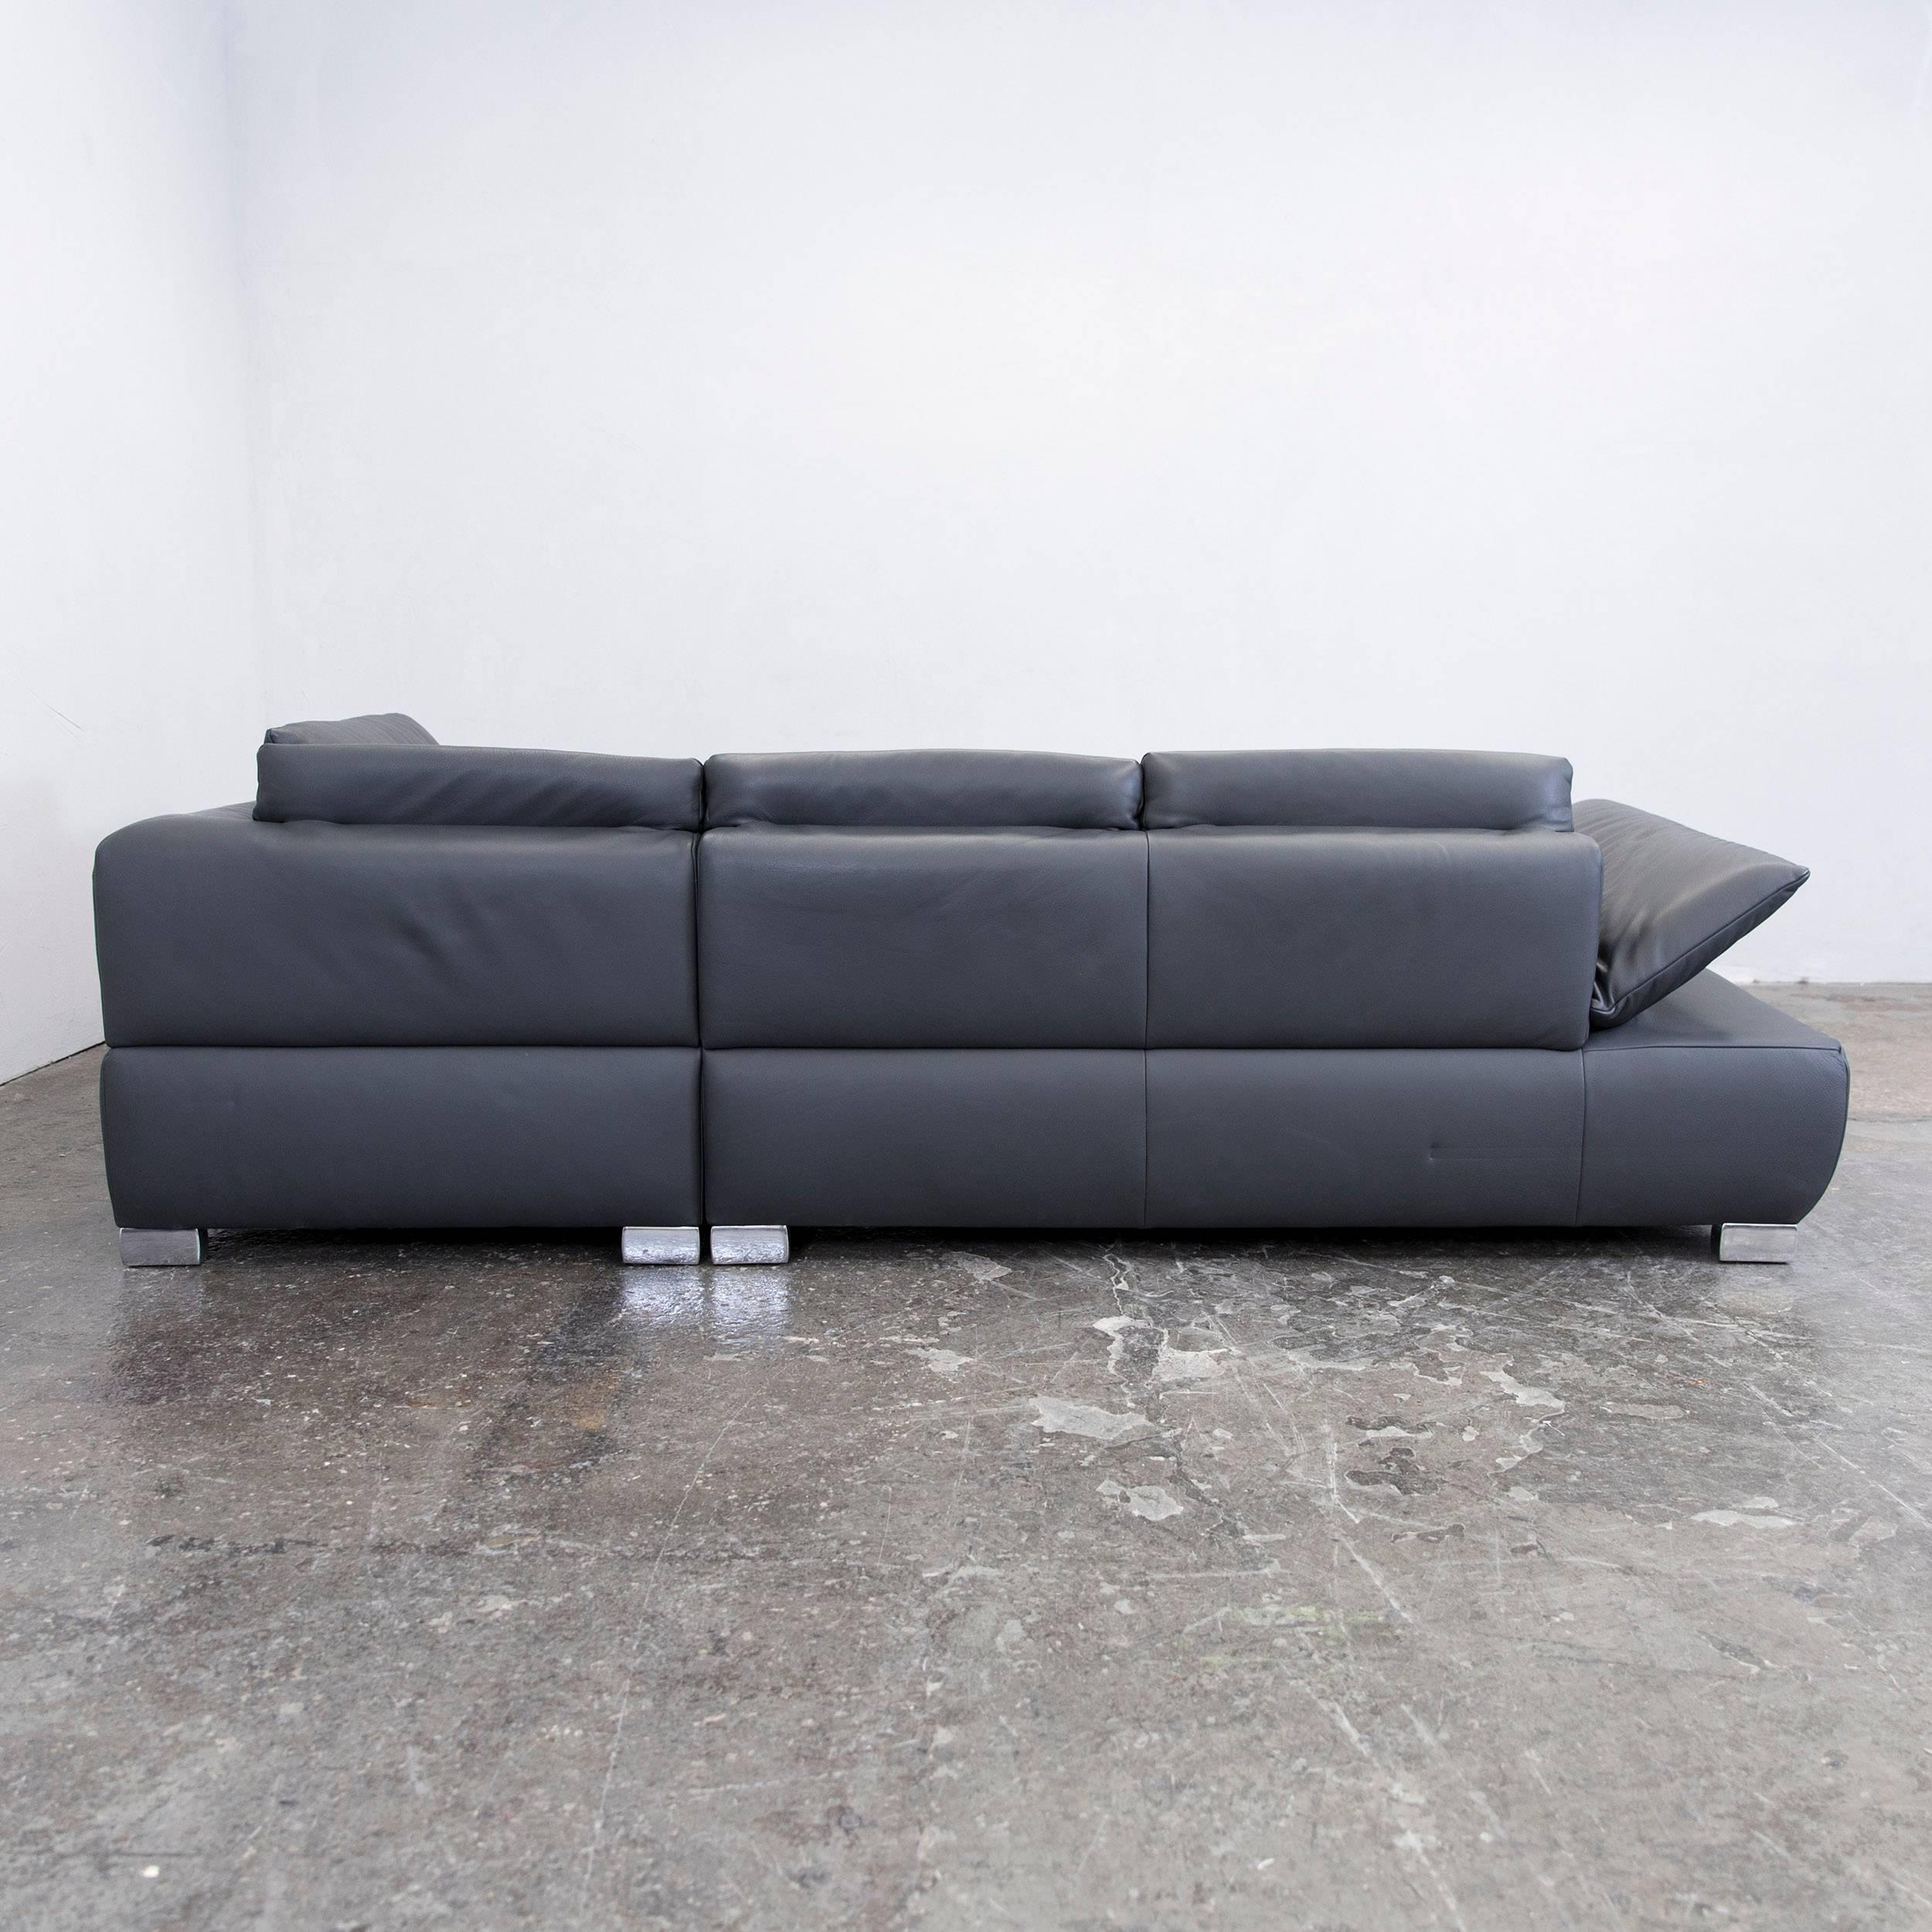 Contemporary Koinor Volare Leather Corner Sofa Grey Anthracite Function Couch